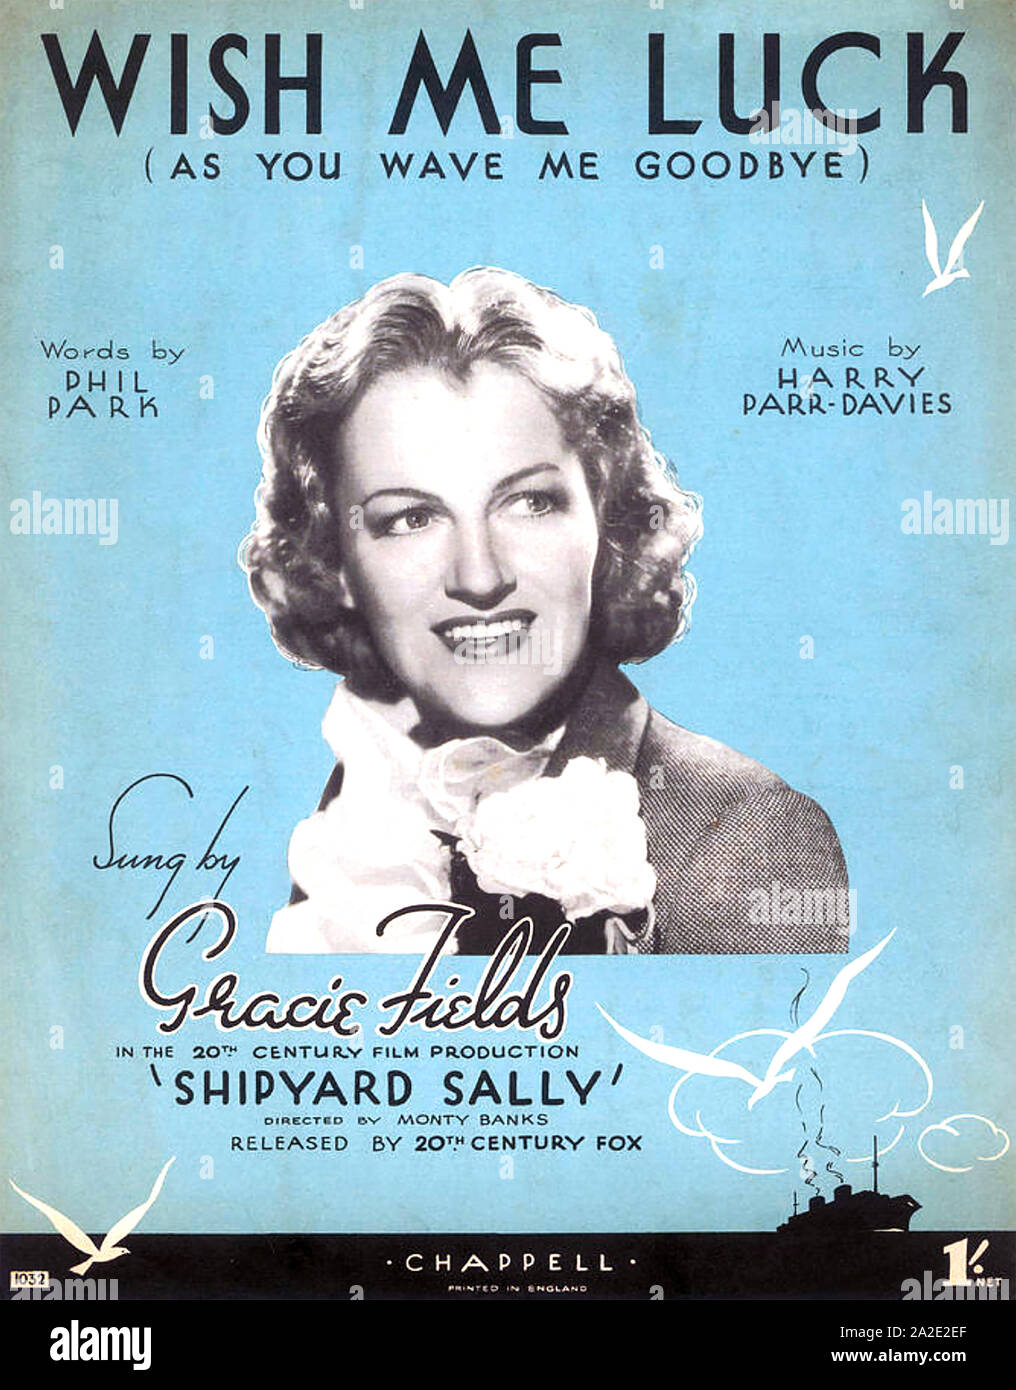 GRACIE FIELDS (1898-1979) English film actress and entertainer on a 1939 music sheet Stock Photo